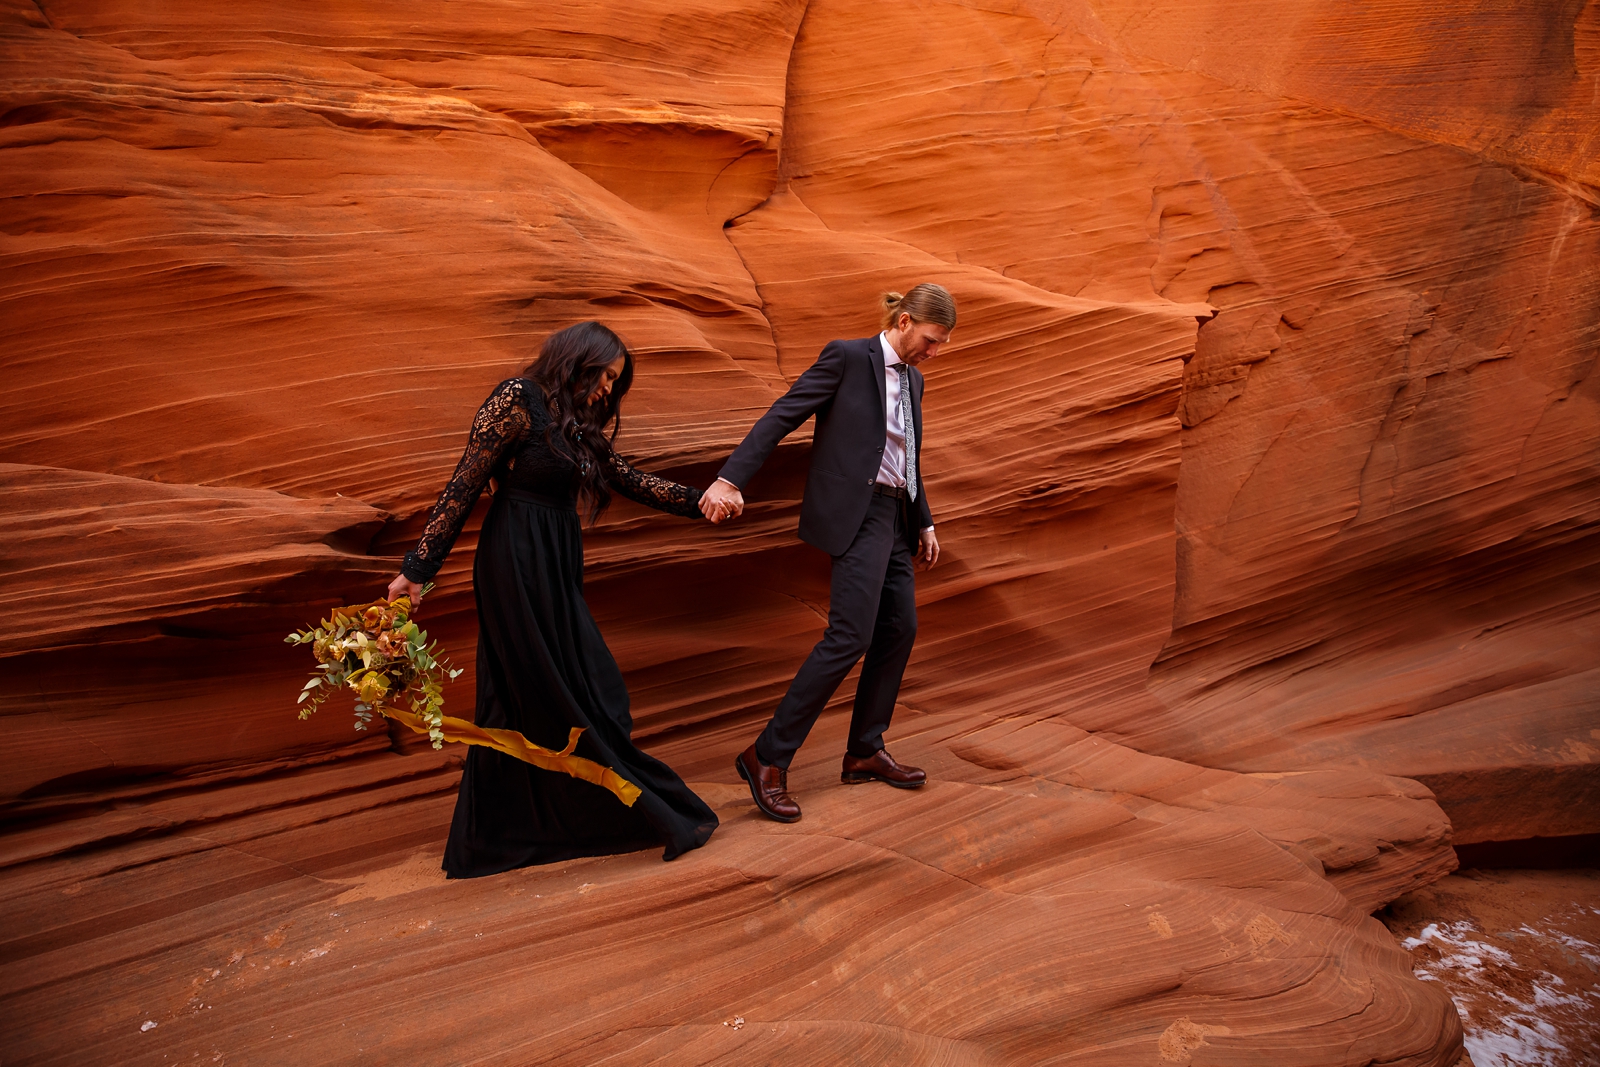 This couple is adventuring in a slot canyon.